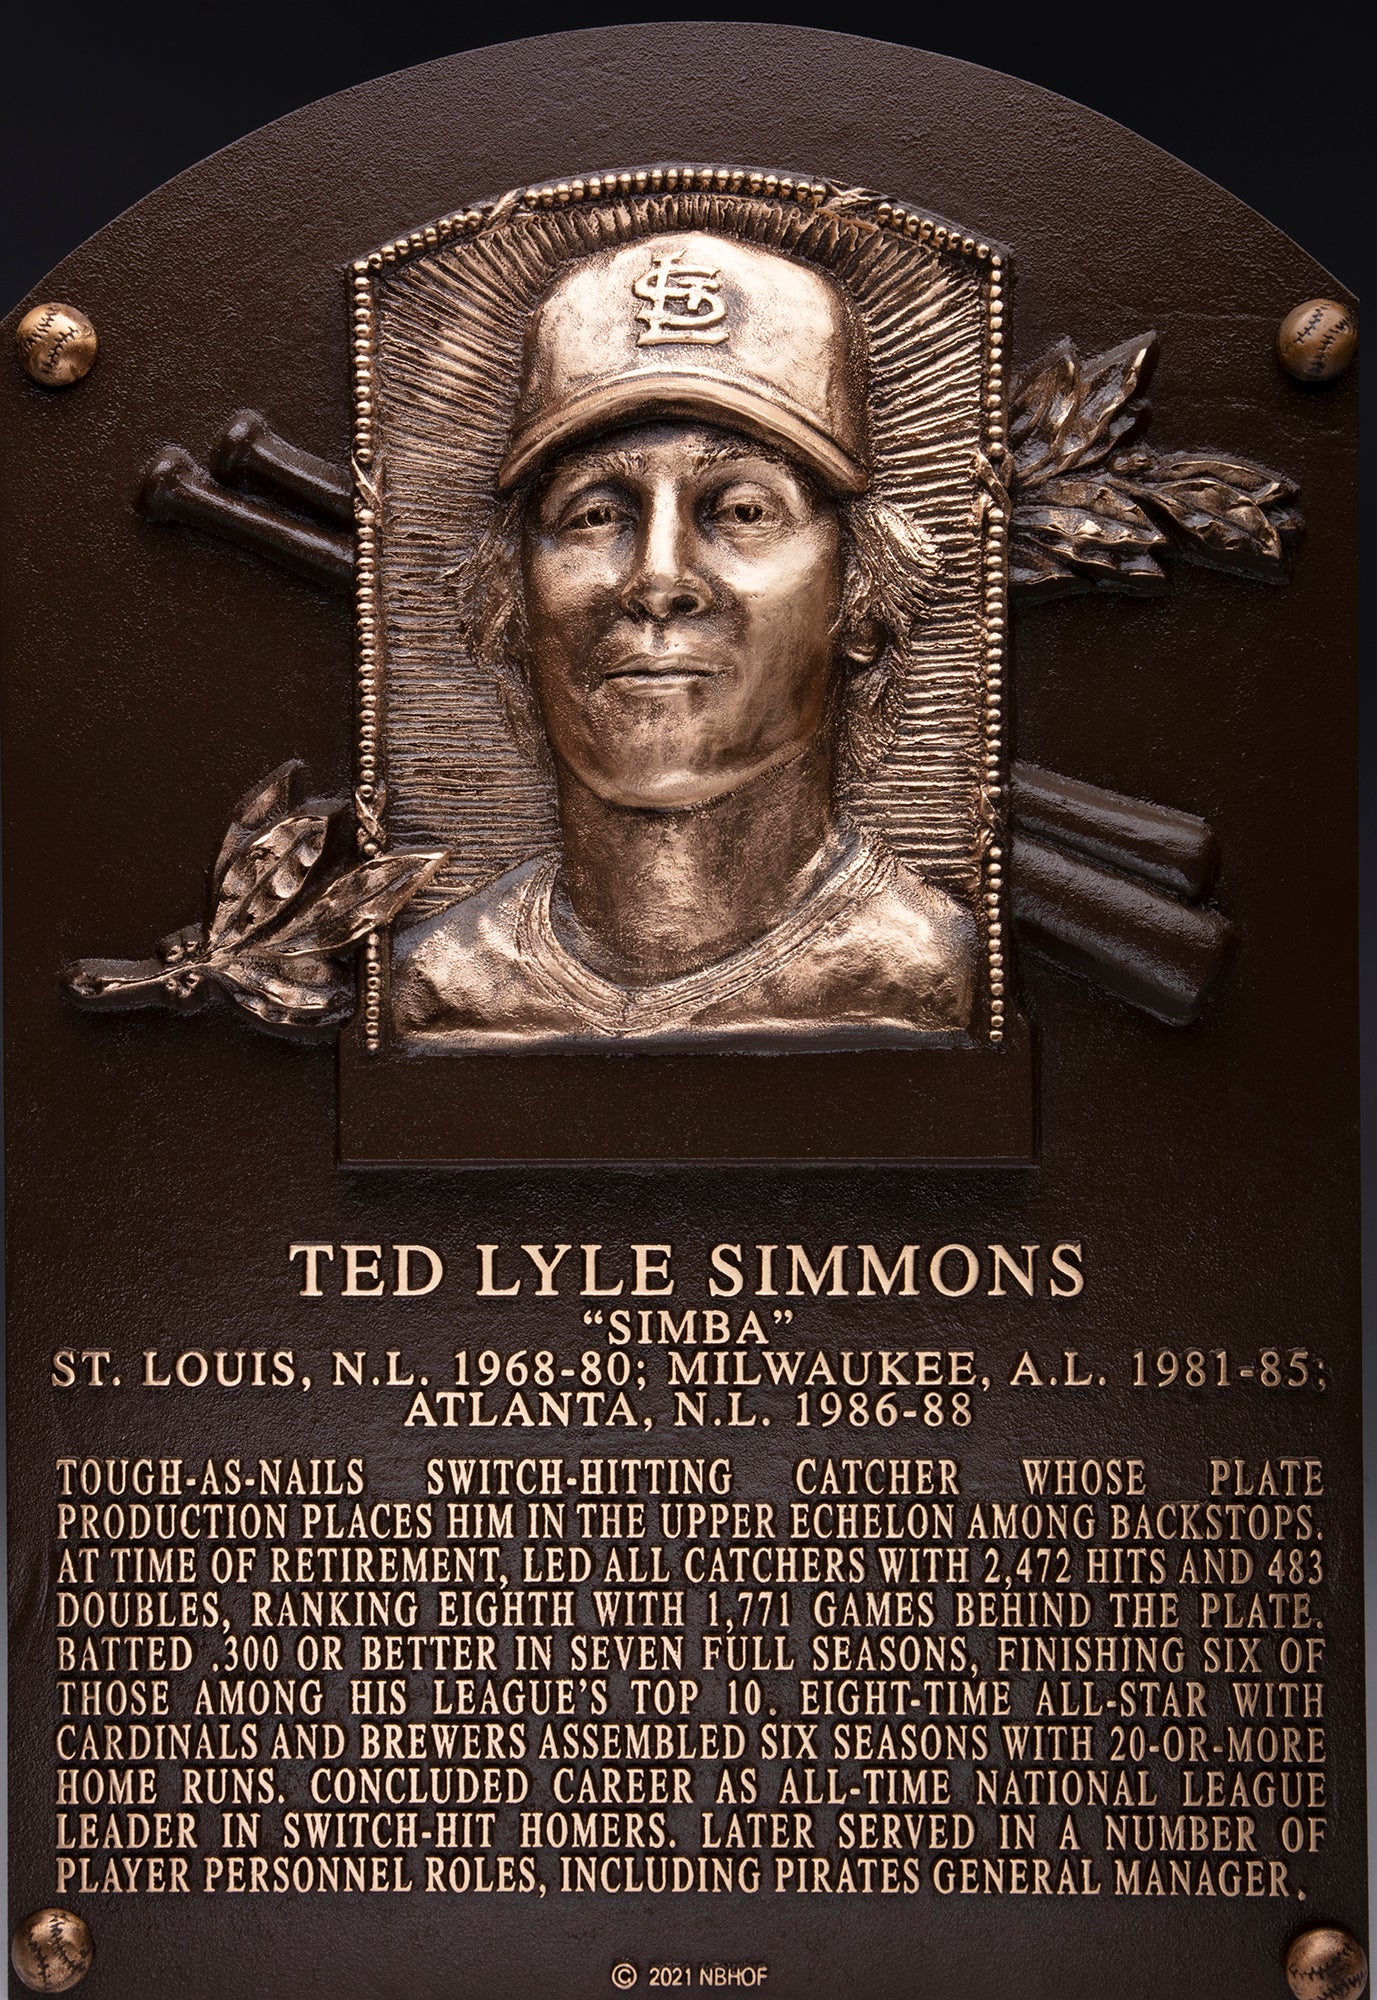 Ted Simmons Hall of Fame plaque